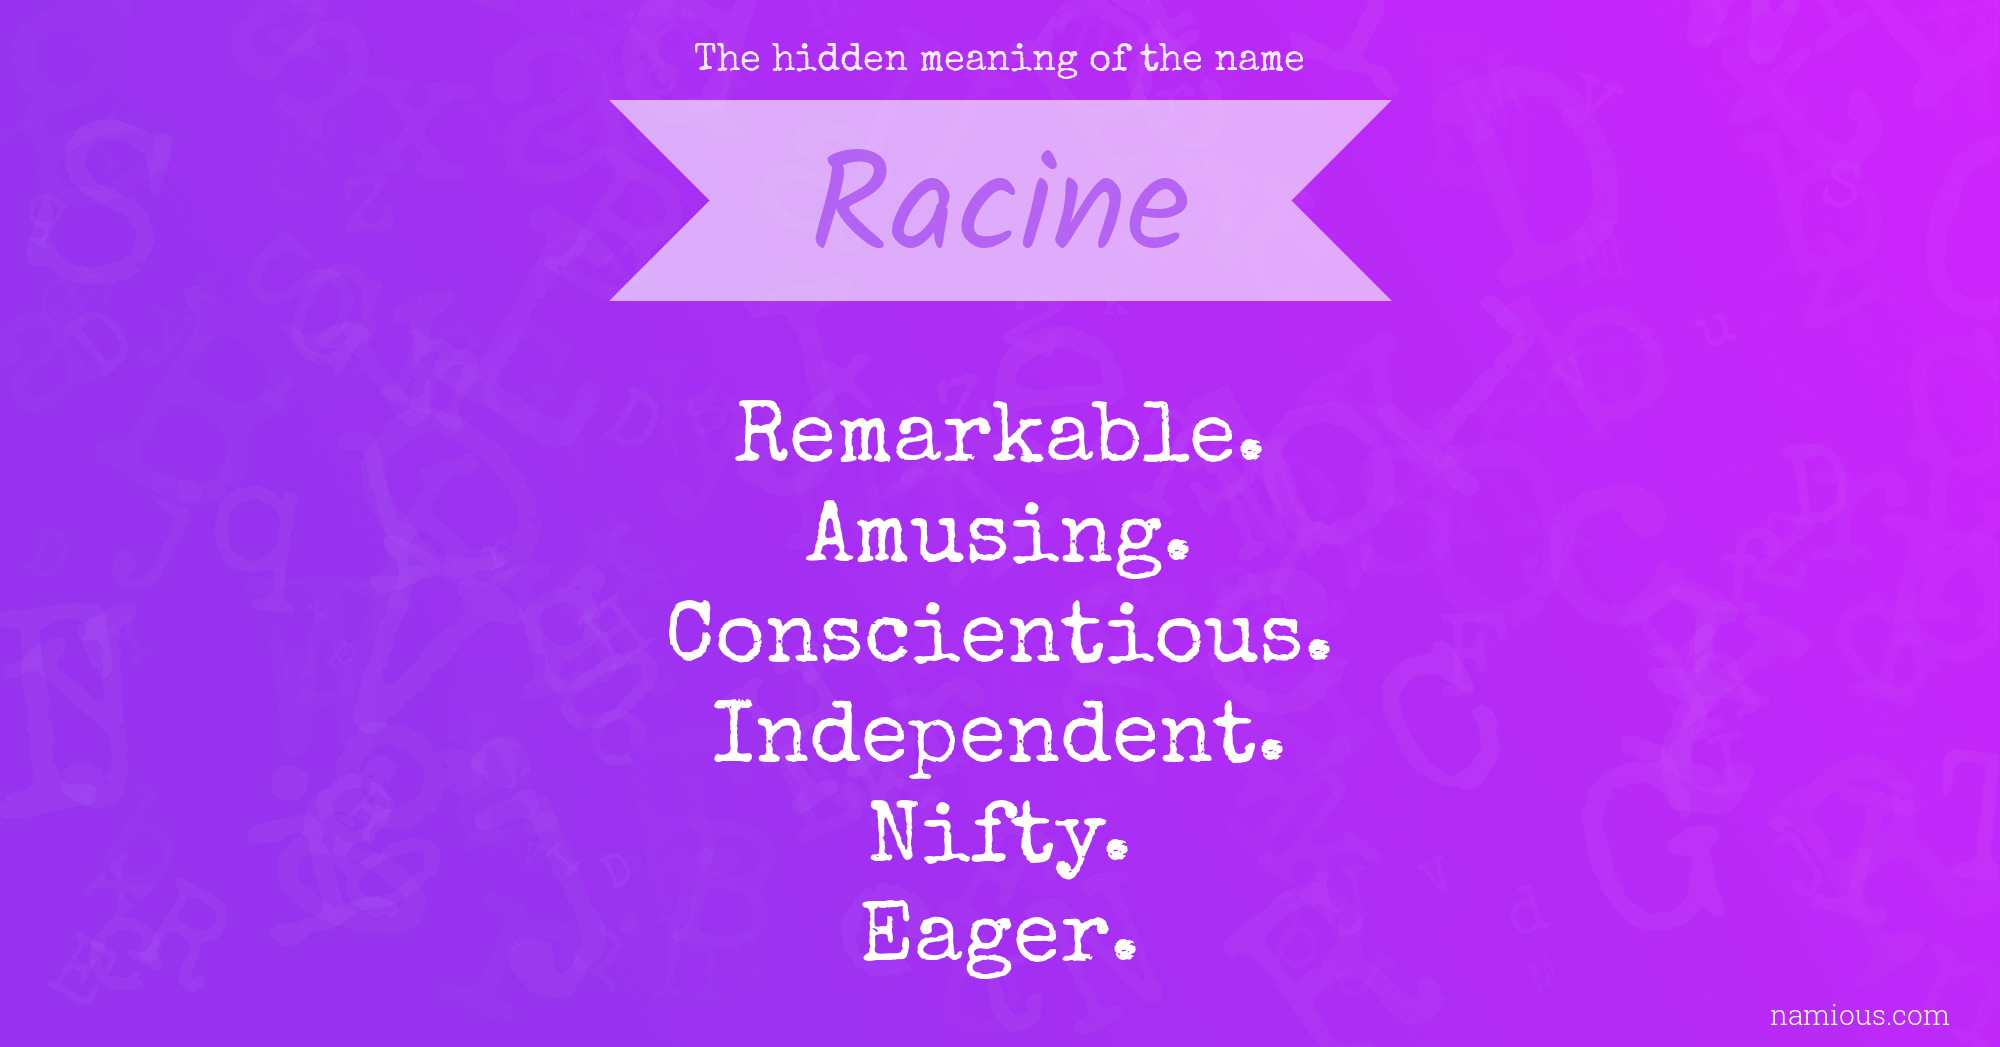 The hidden meaning of the name Racine